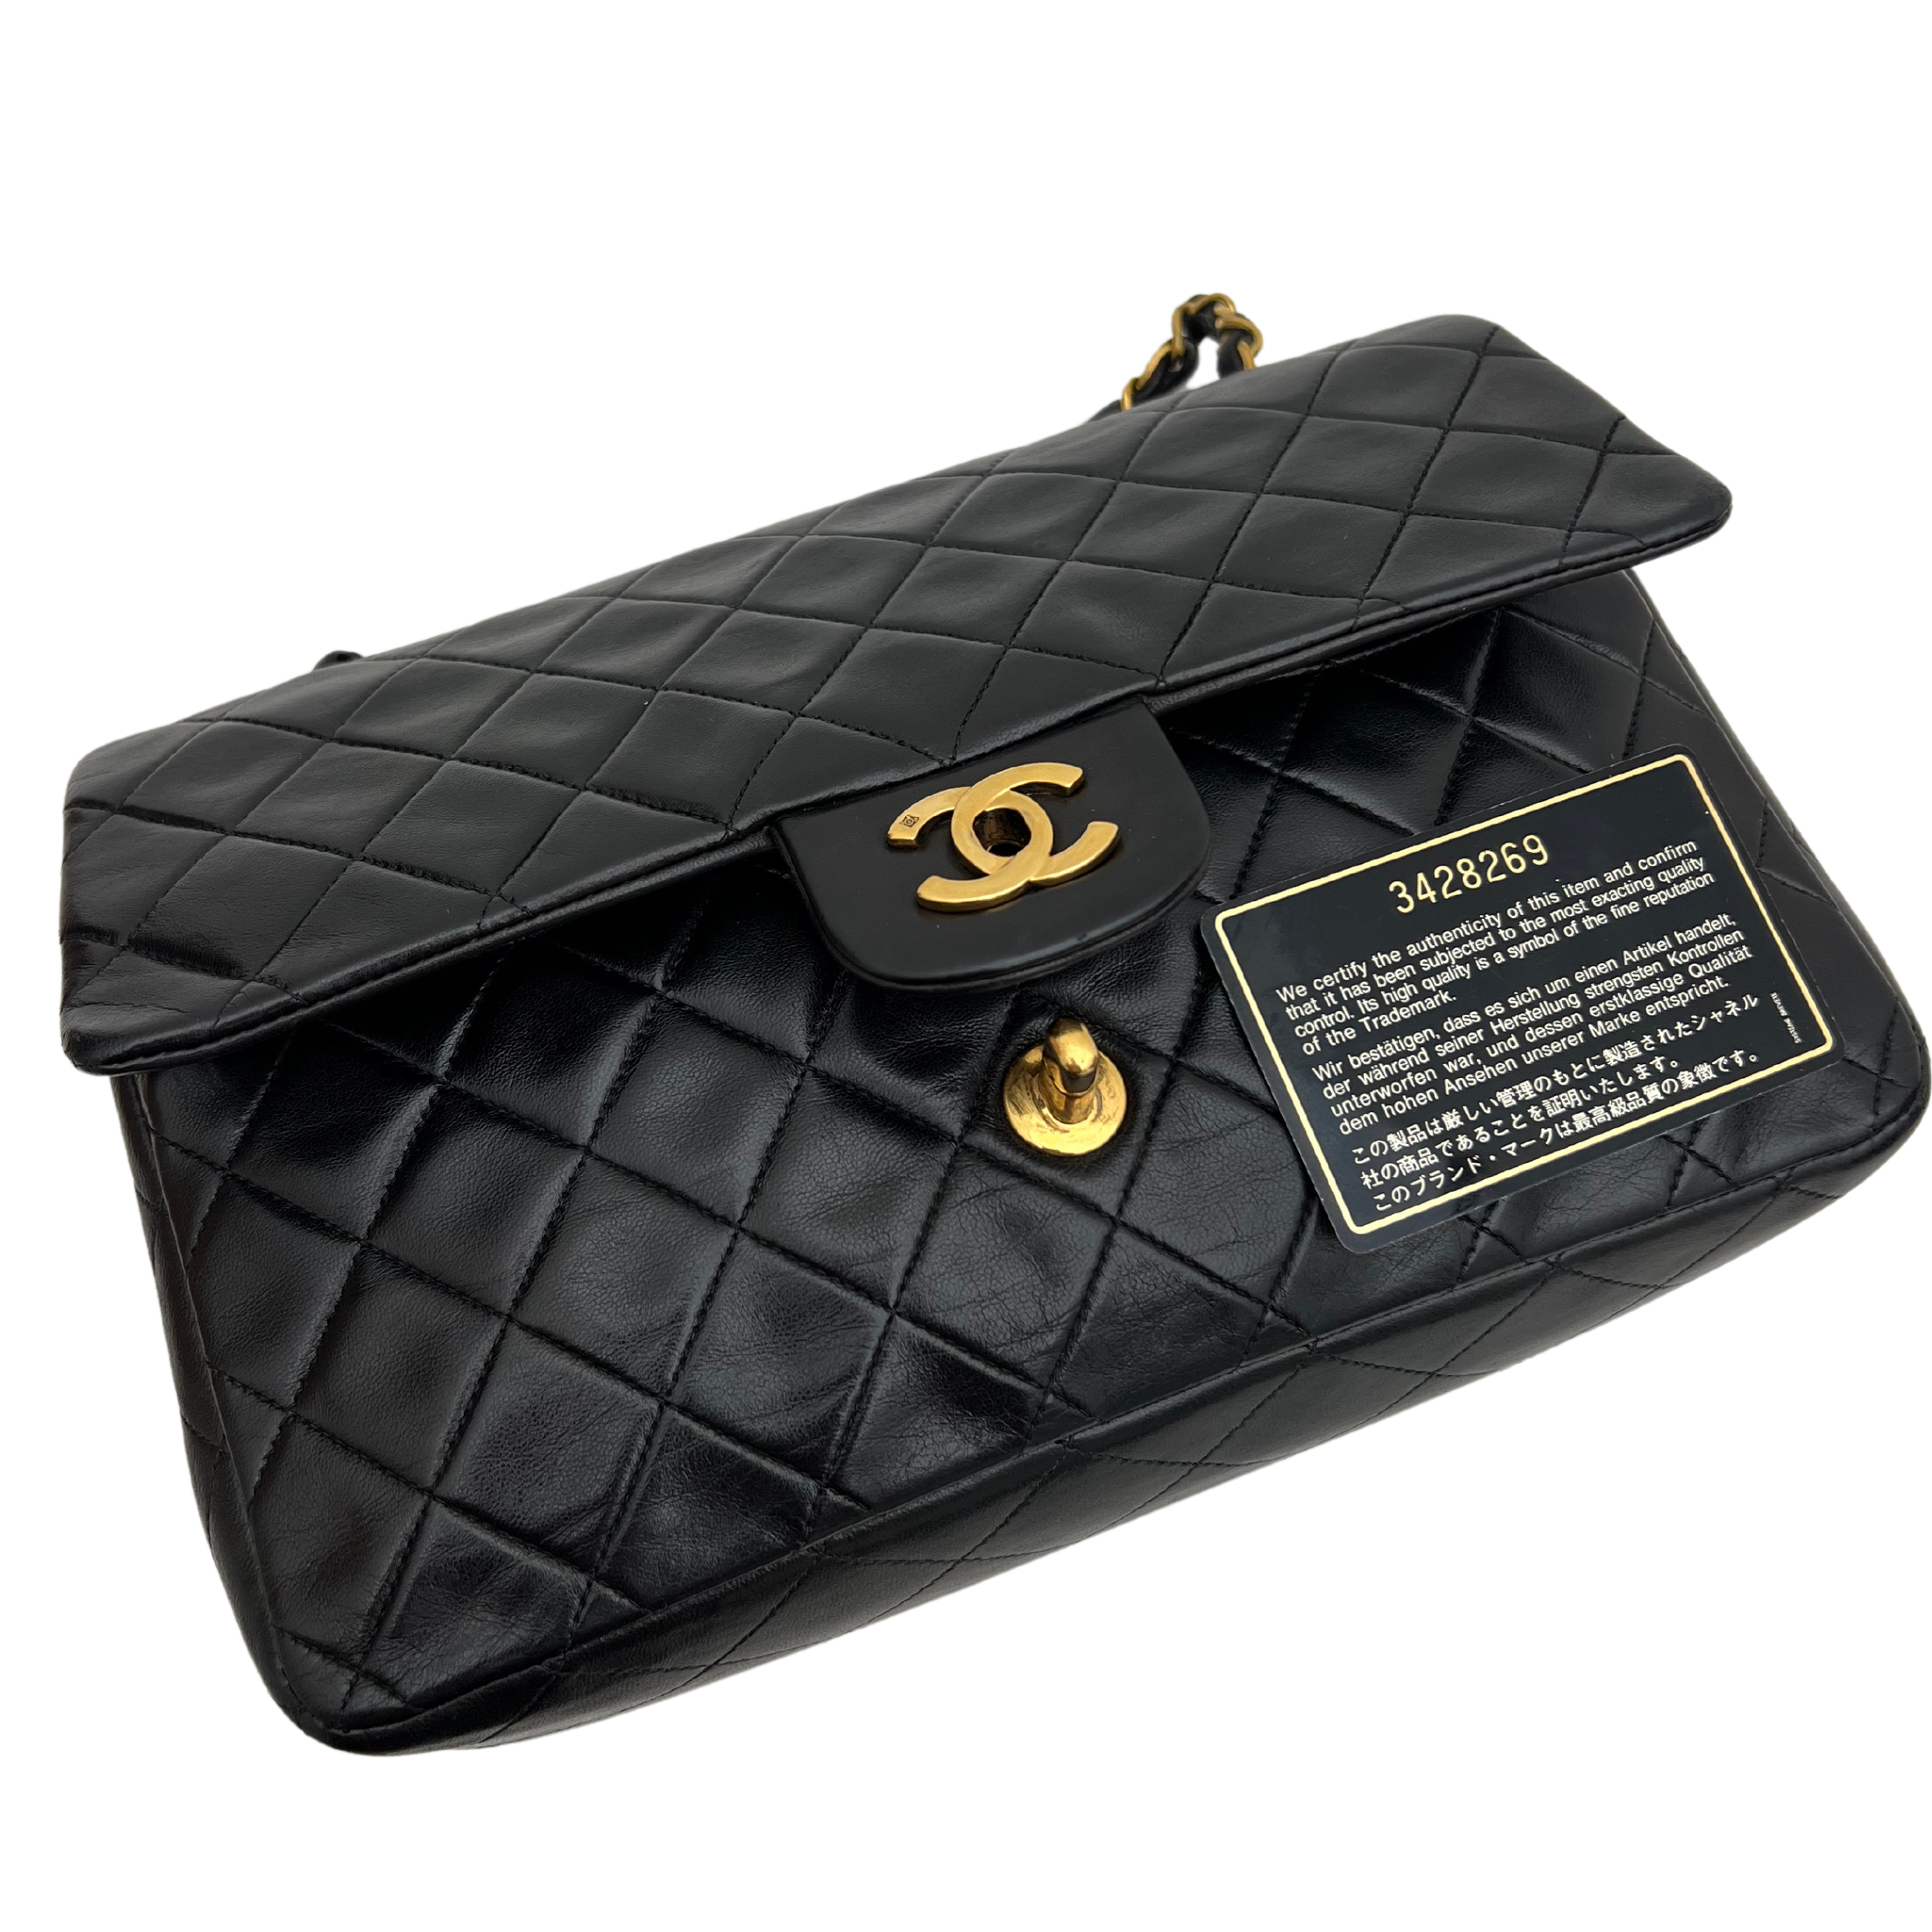 CLASSIC TIMELESS MEDIUM  - CHANEL Lola Collective